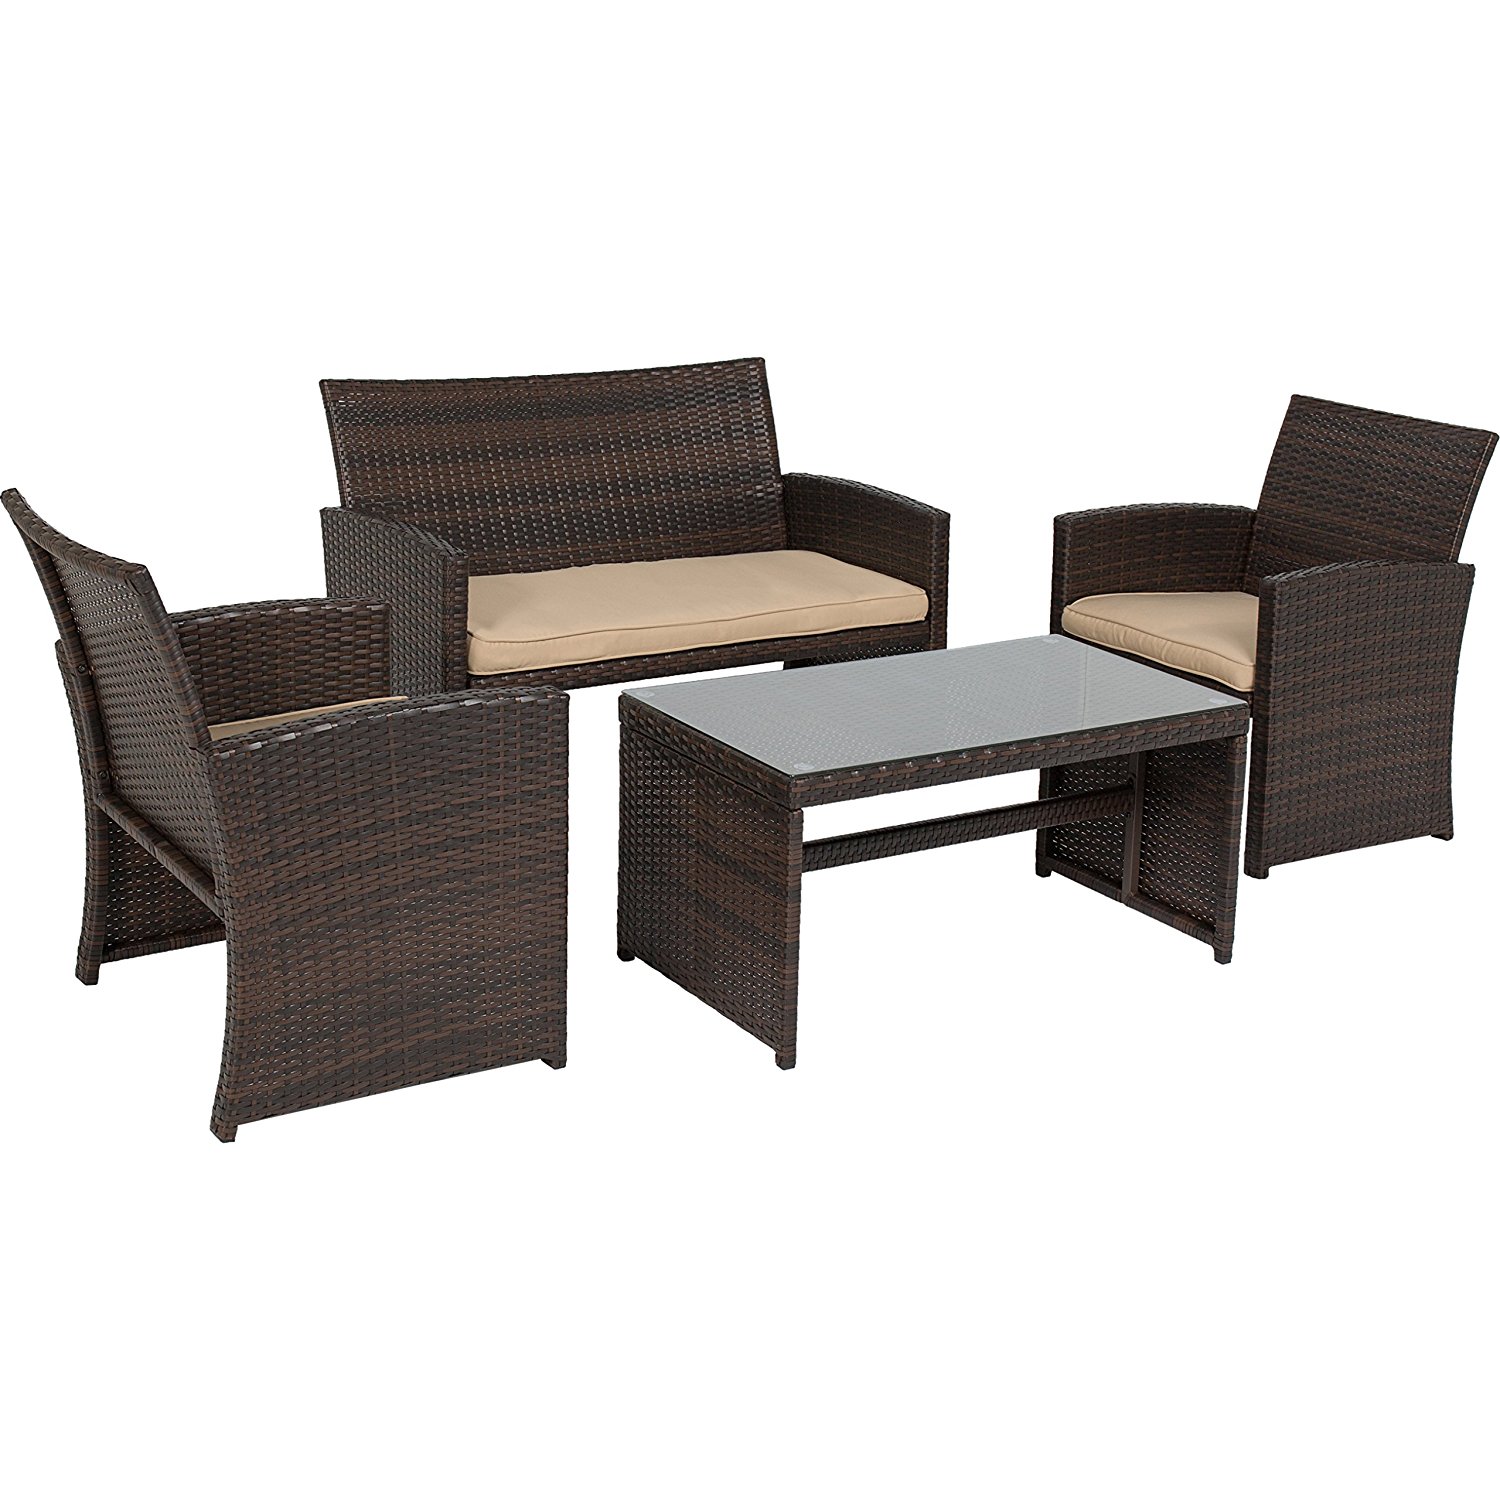 Best Choice Products 4pc Wicker Outdoor Patio Furniture Set Custioned Seats